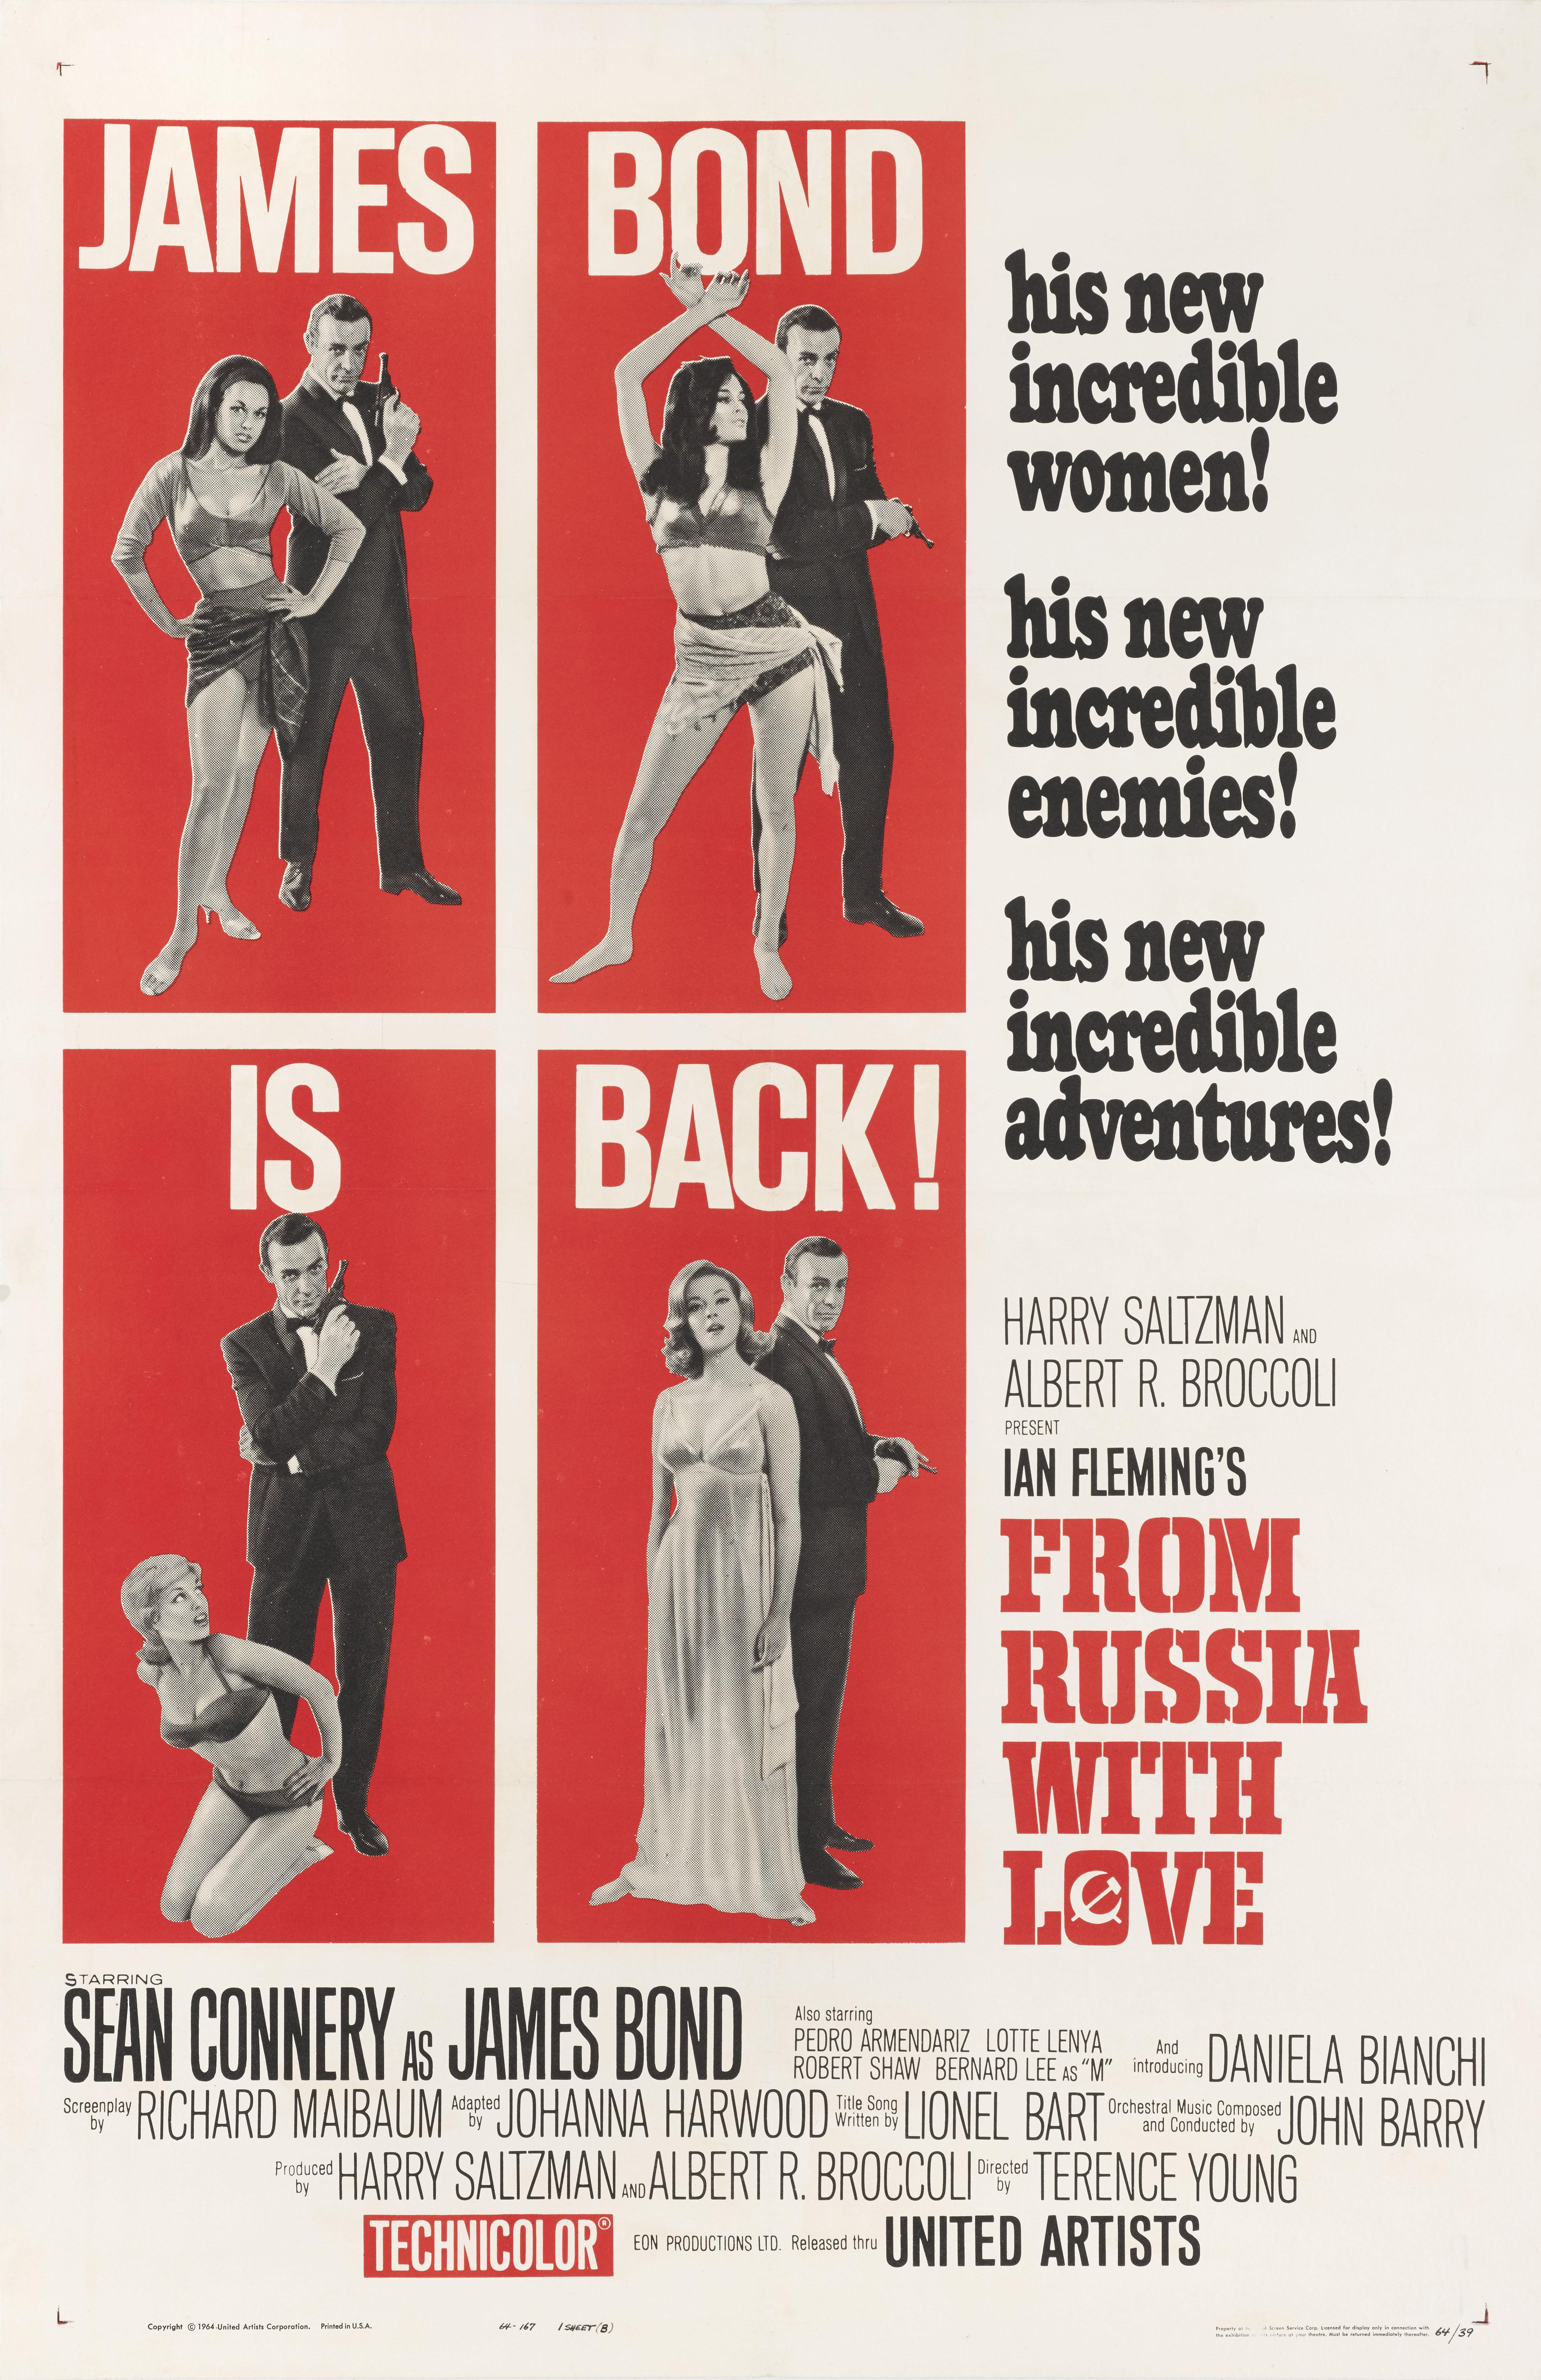 Original US style B film poster for the second James Bond film From Russia with Love 1963.
The film starred Sean Connery as James Bond 007 and was directed by Terence Young.
This poster is conservation linen backed and it would be shipped rolled in